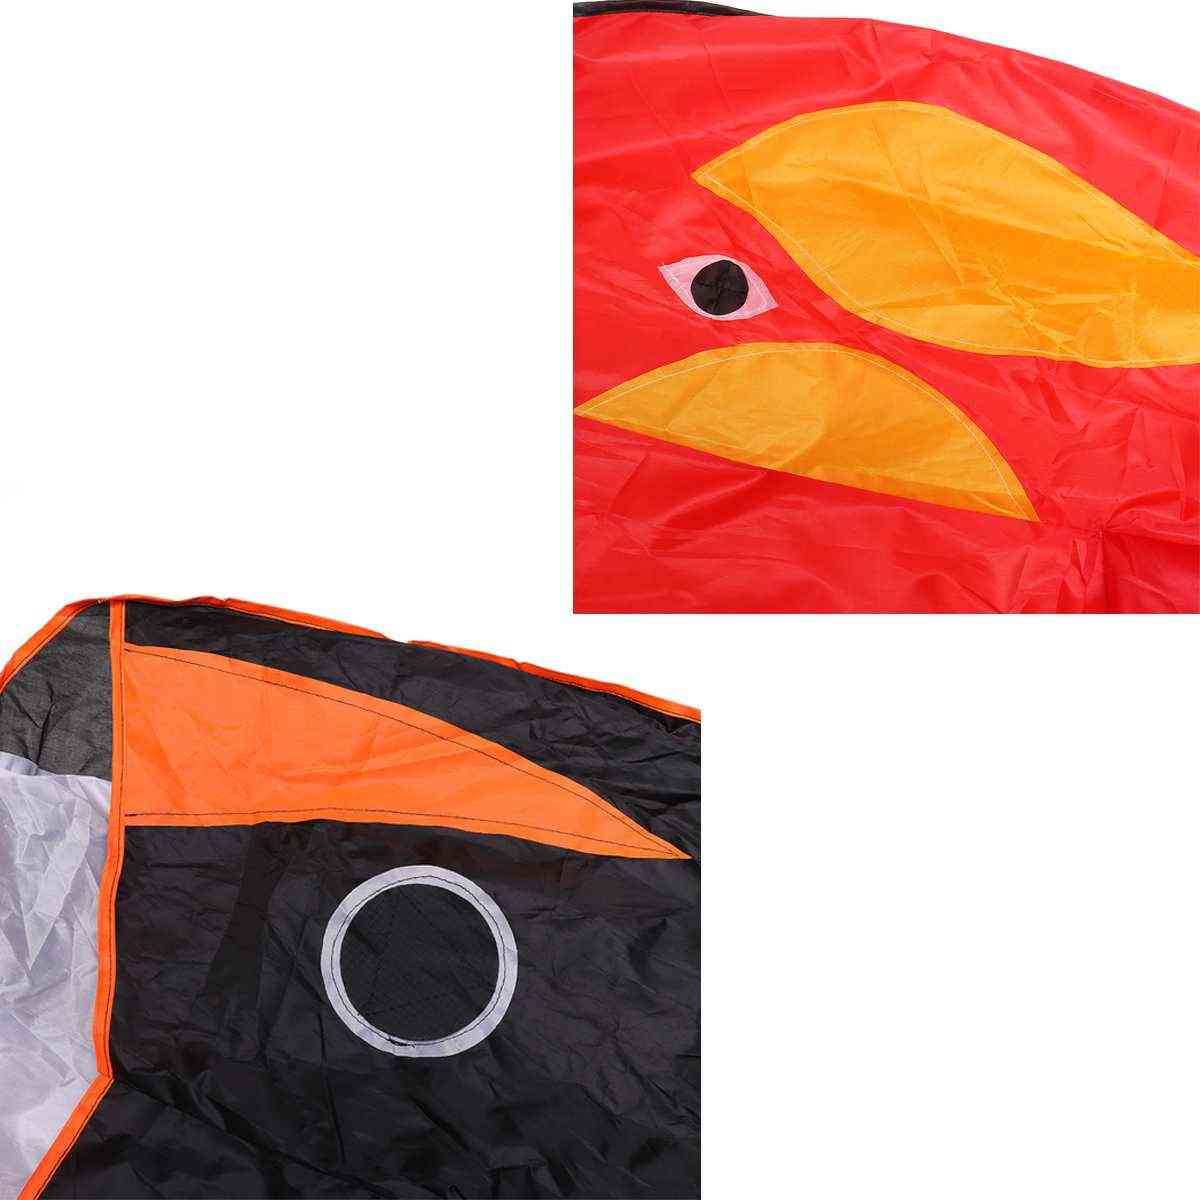 3d Dolphin Soft Kite Toy